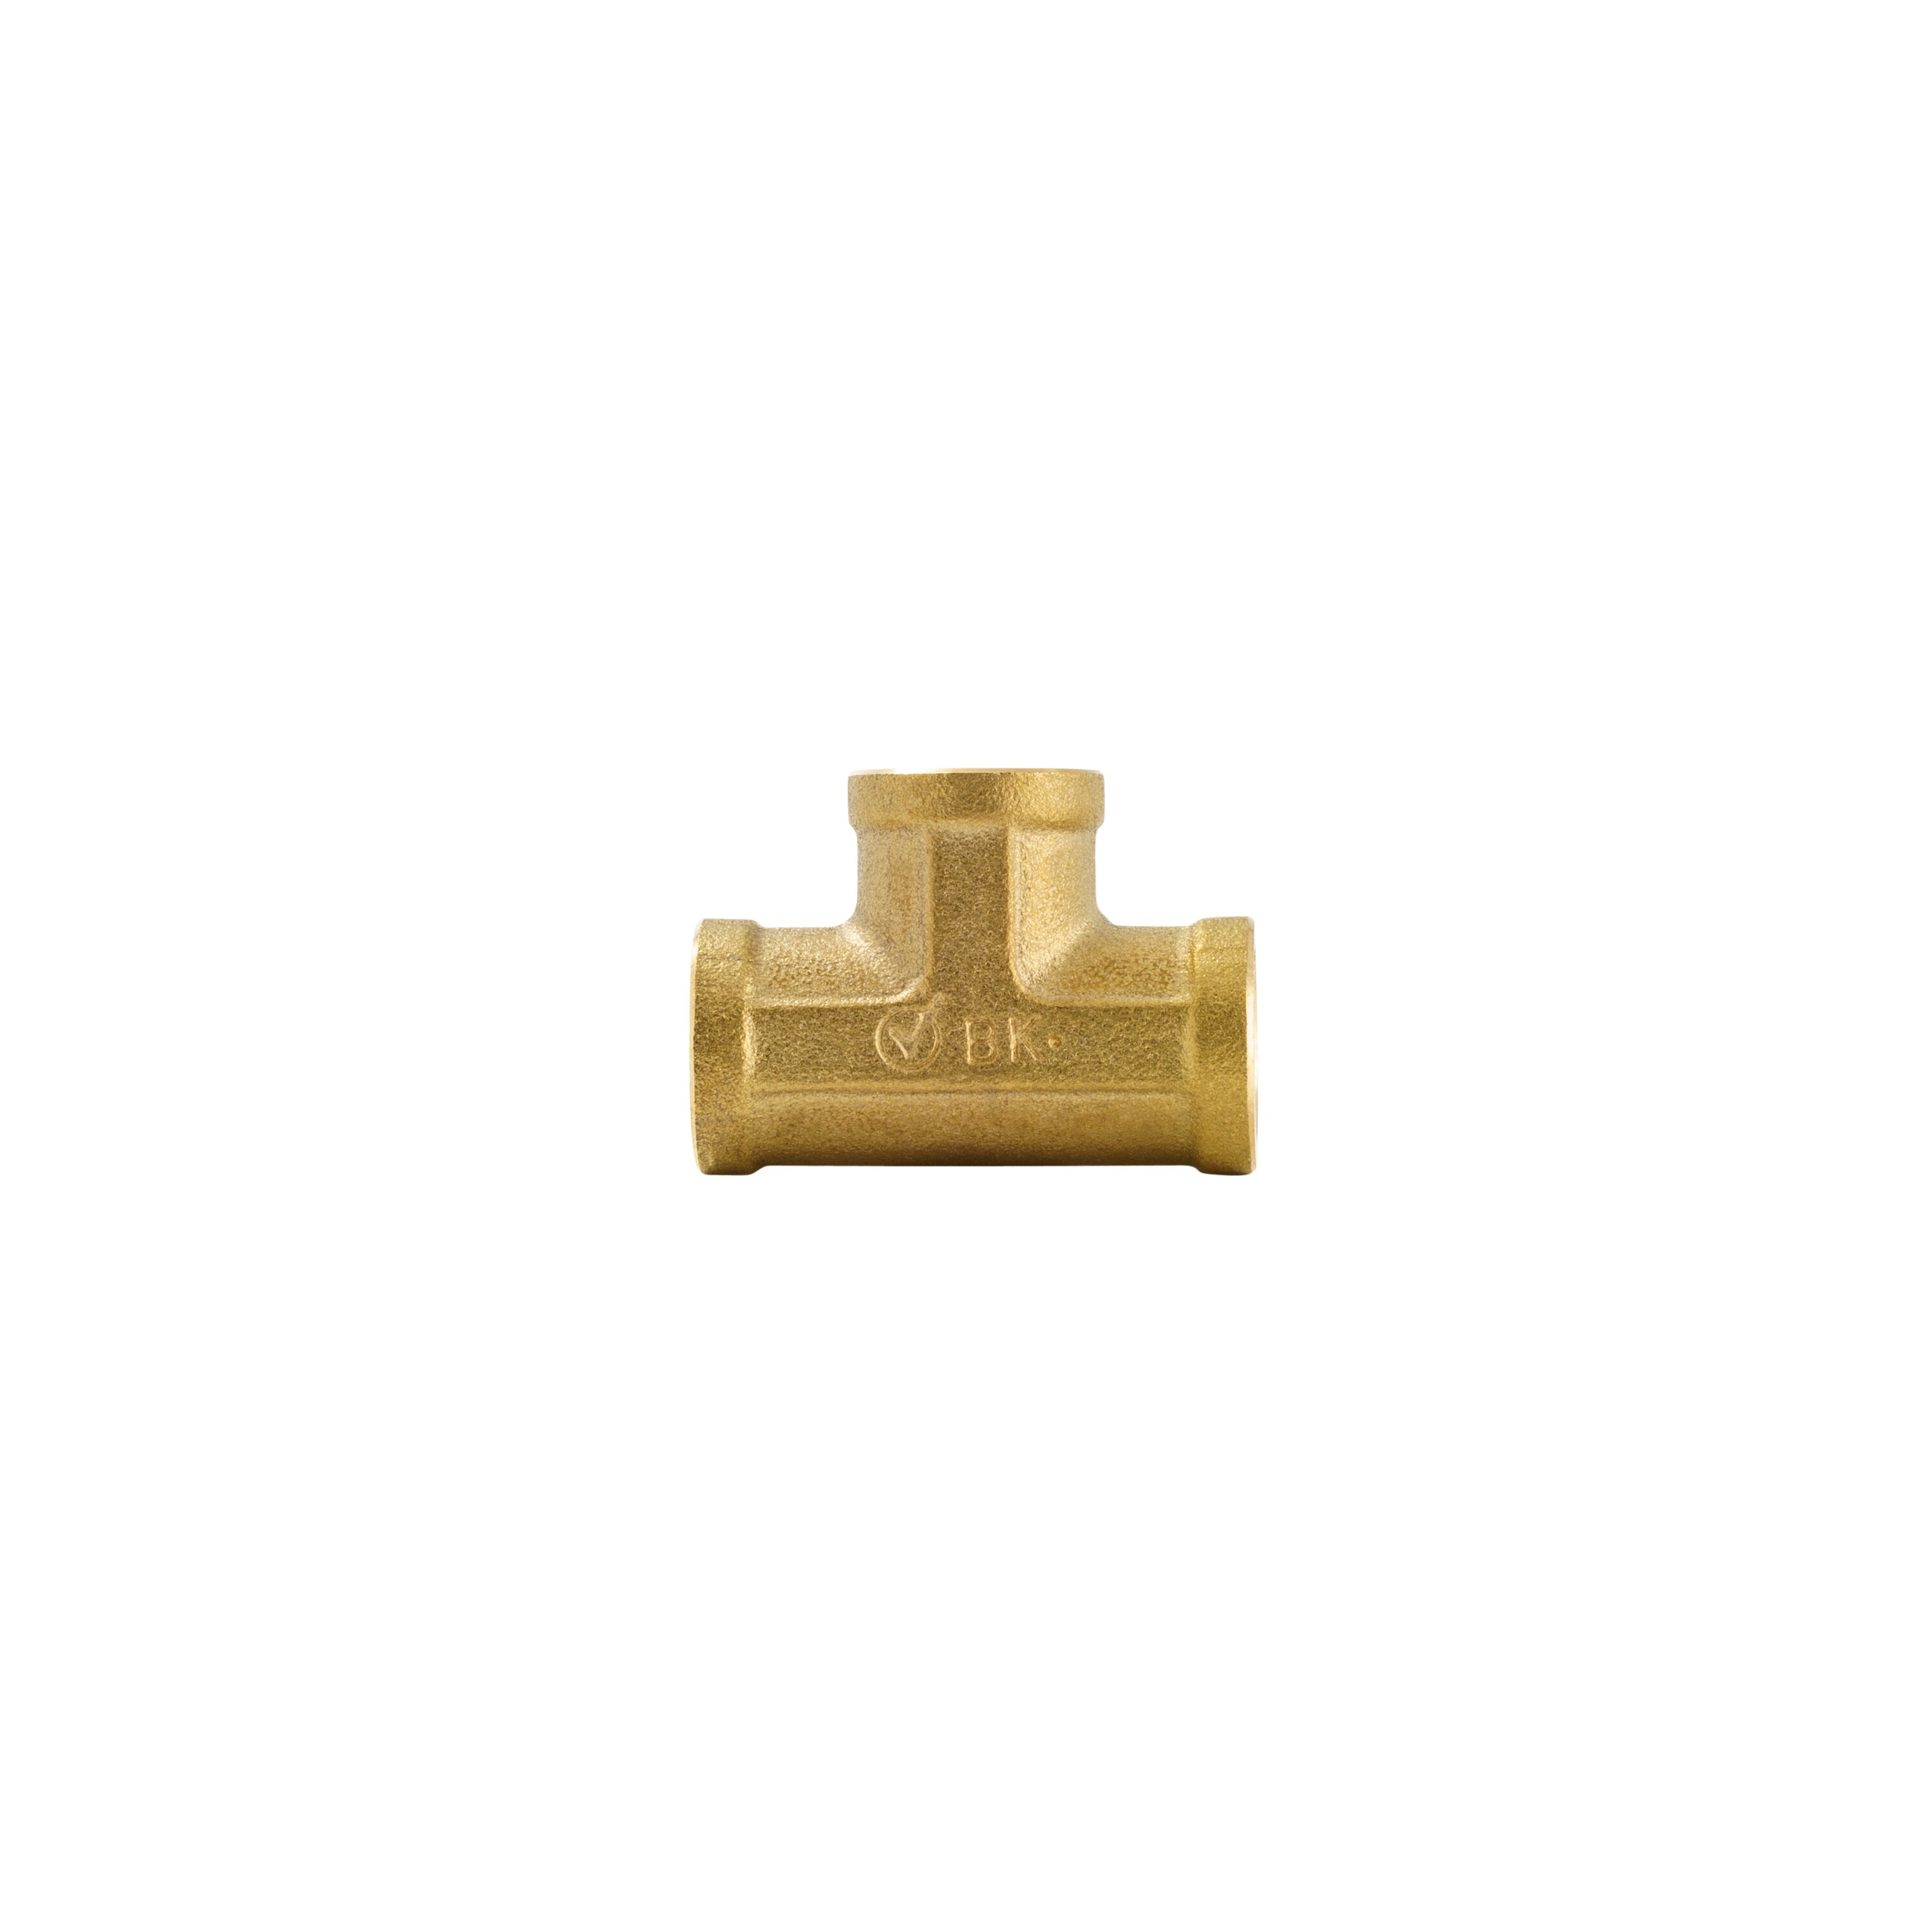 Proline Series 1/2-in x 1/2-in Threaded Tee Fitting in the Brass